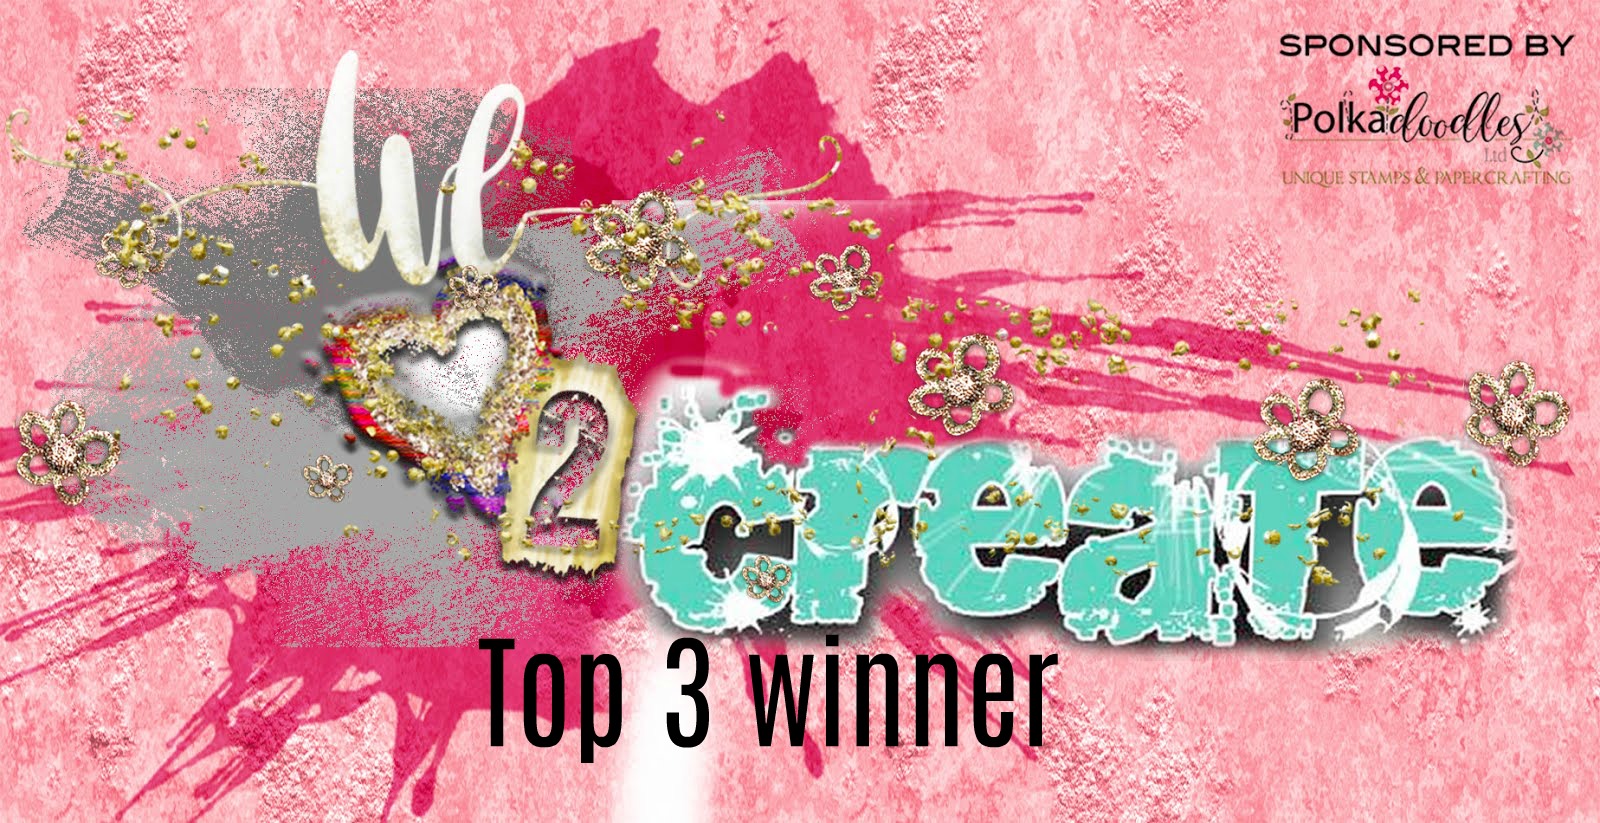 My top hat was chosen as Top 3 by the DT at We love 2 create